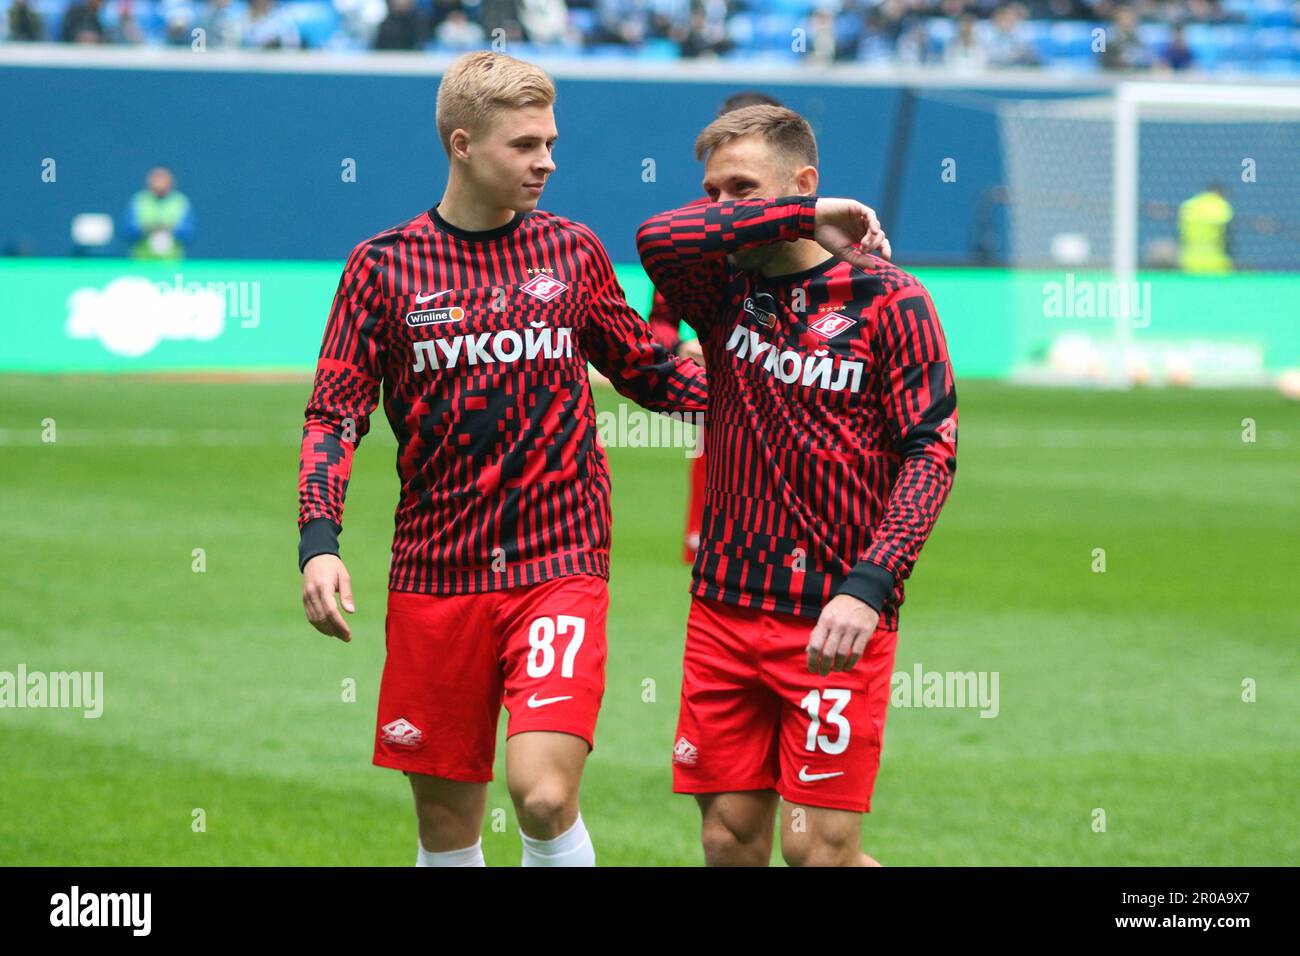 Saint Petersburg, Russia. 07th May, 2023. Daniil Zorin (No.87), Maciej Rybus (No.13) of Spartak in action during the Russian Premier League football match between Zenit Saint Petersburg and Spartak Moscow at Gazprom Arena. Zenit 3:2 Spartak. Credit: SOPA Images Limited/Alamy Live News Stock Photo